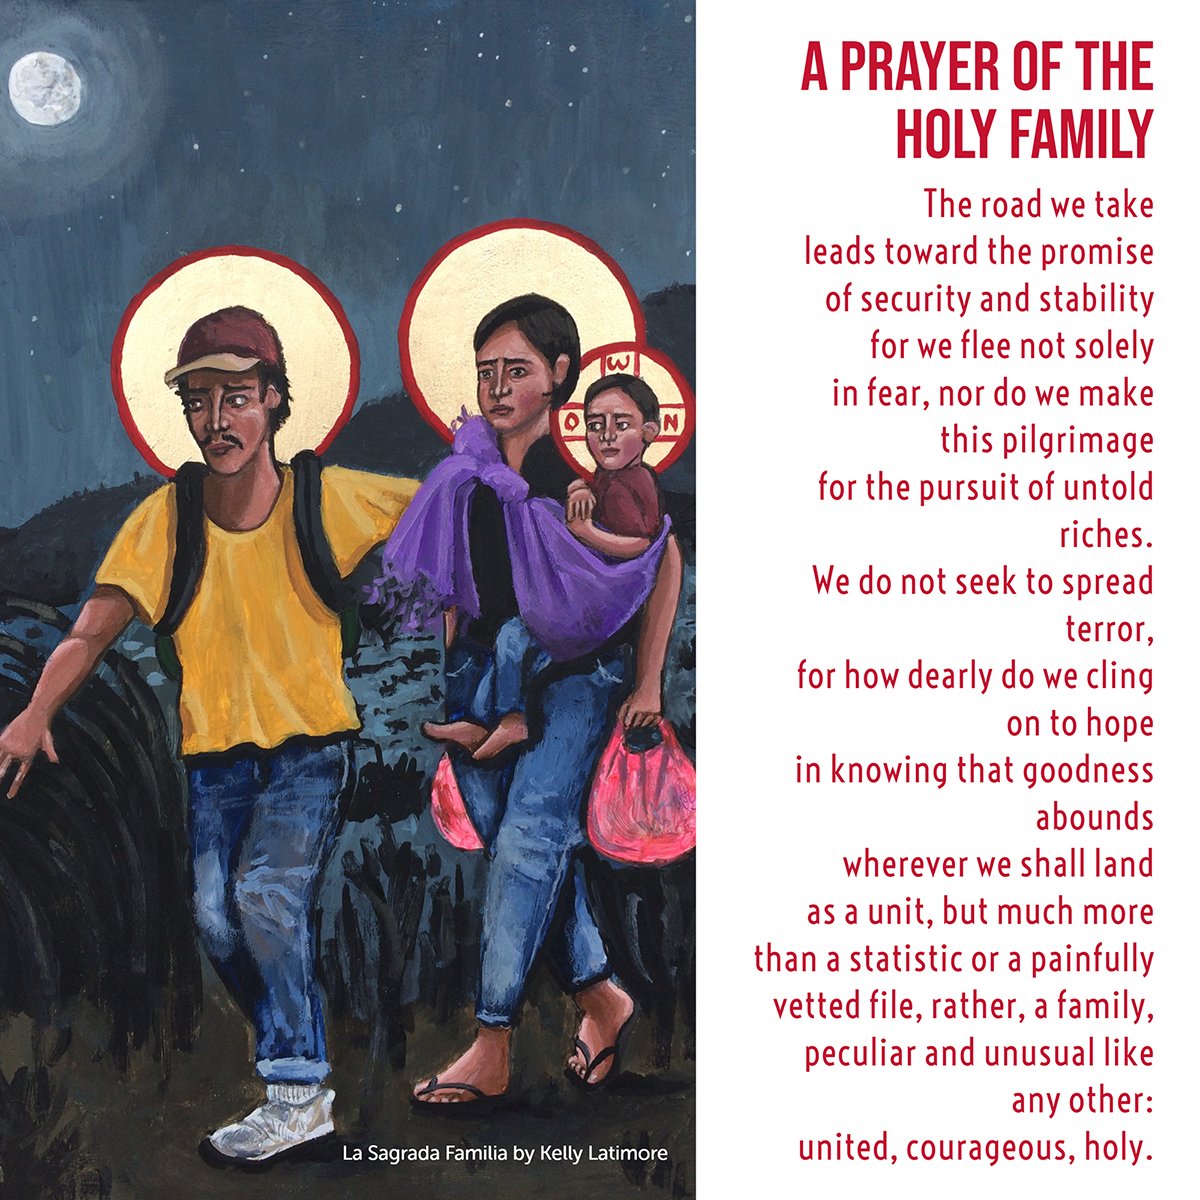 Today, on the feast of the Holy Family, we pray for all families seeking refuge and peace. Prayer by @JoshuaUtter of @jrsusa; icon by @KLICONS. ow.ly/5h7H50MeXZh